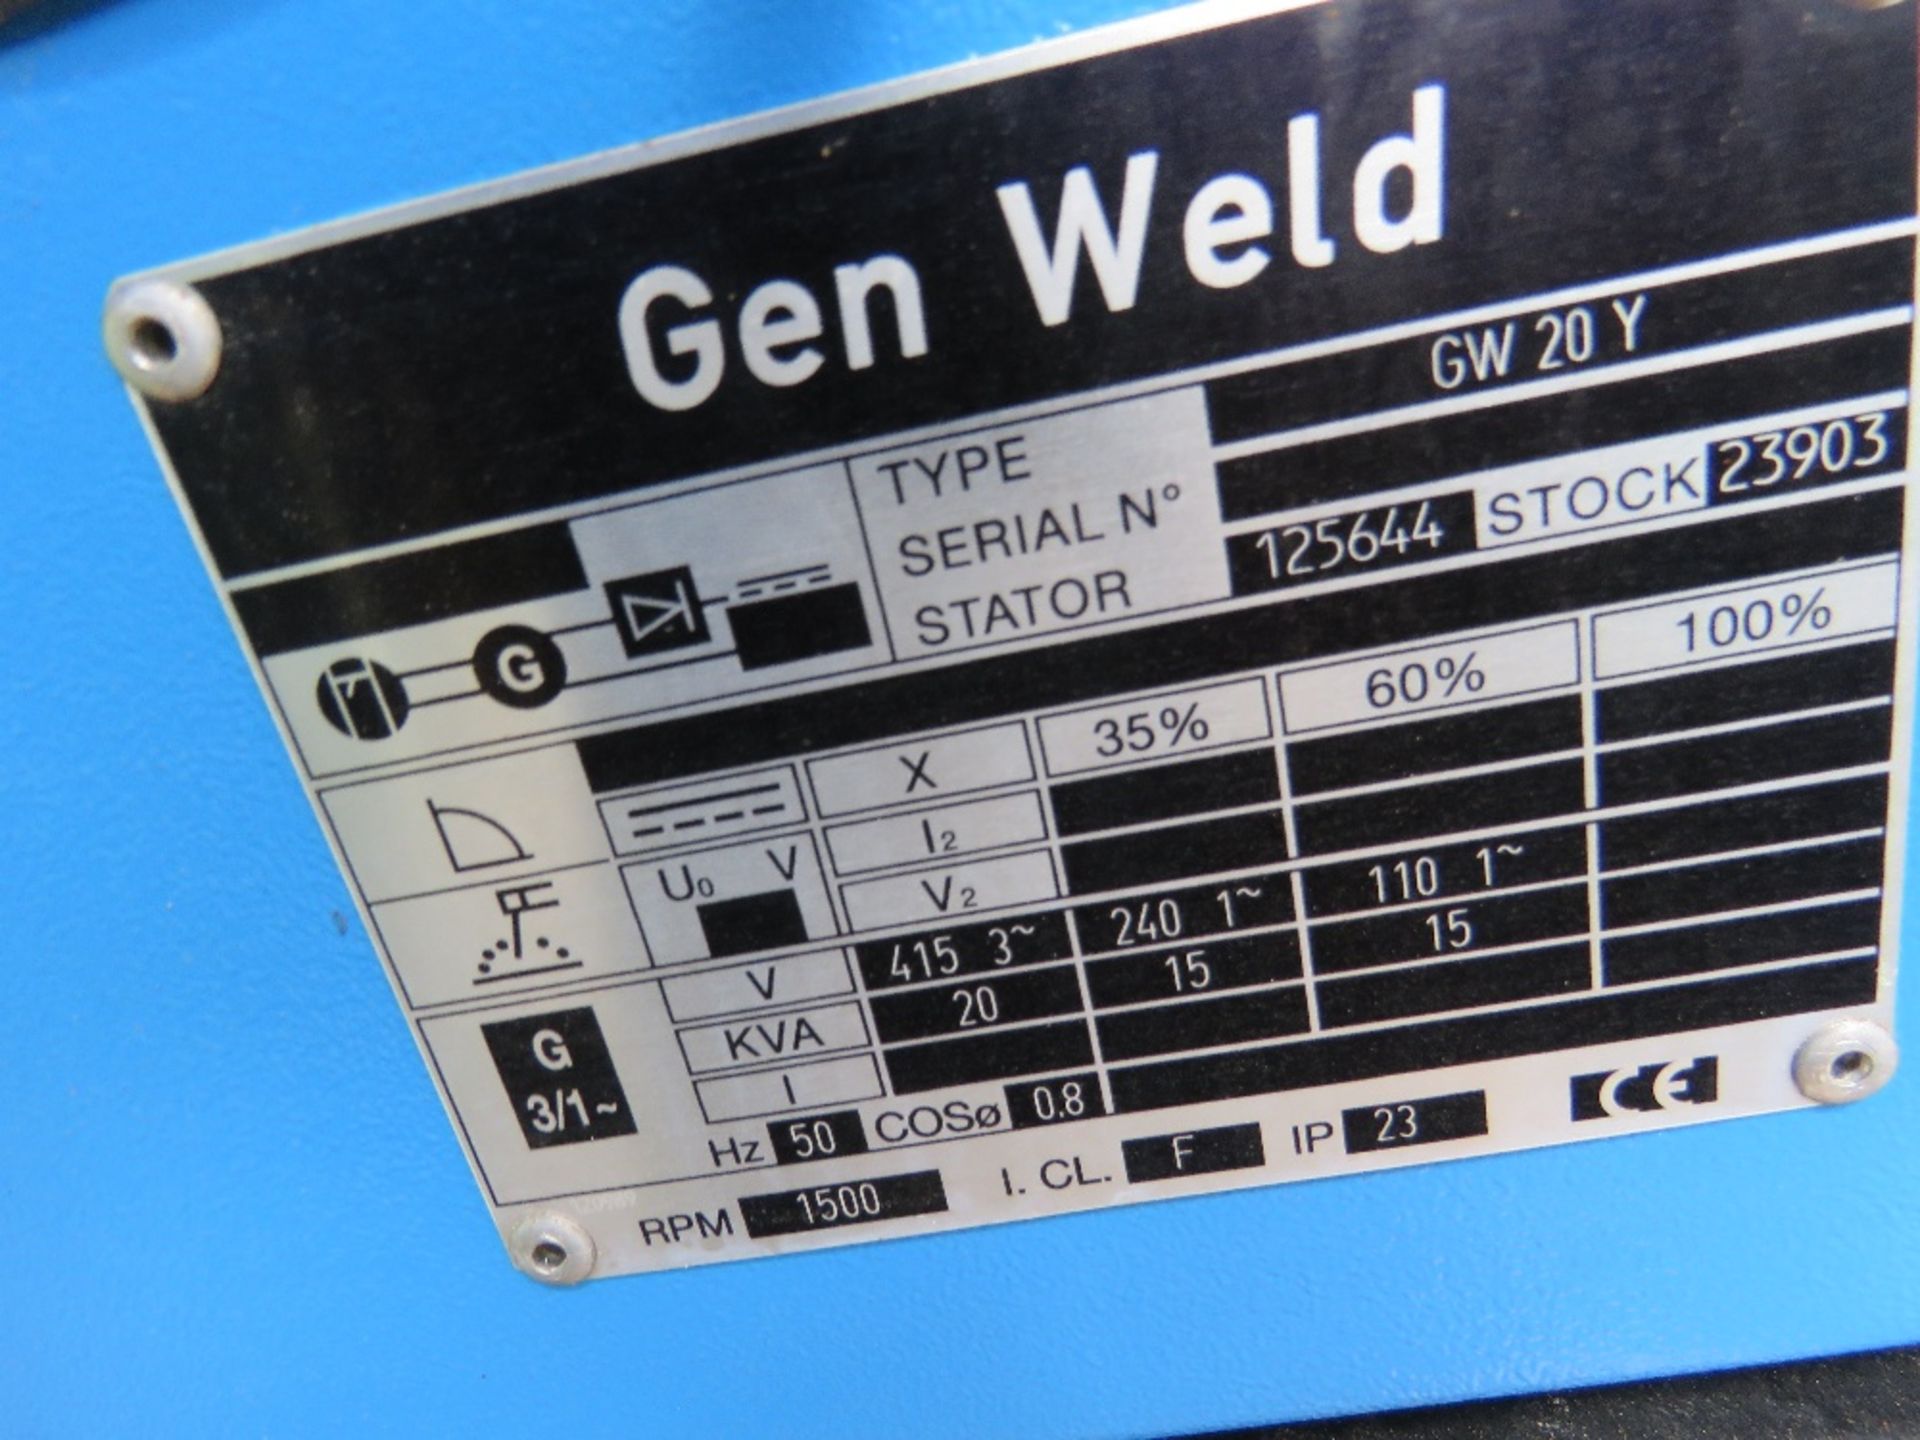 GENSET GENWELD GW20Y YANMAR DIESEL ENGINED SKID GENERATOR. WHEN TESTED WAS SEEN TO RUN, OUTPUT UNTES - Image 4 of 6